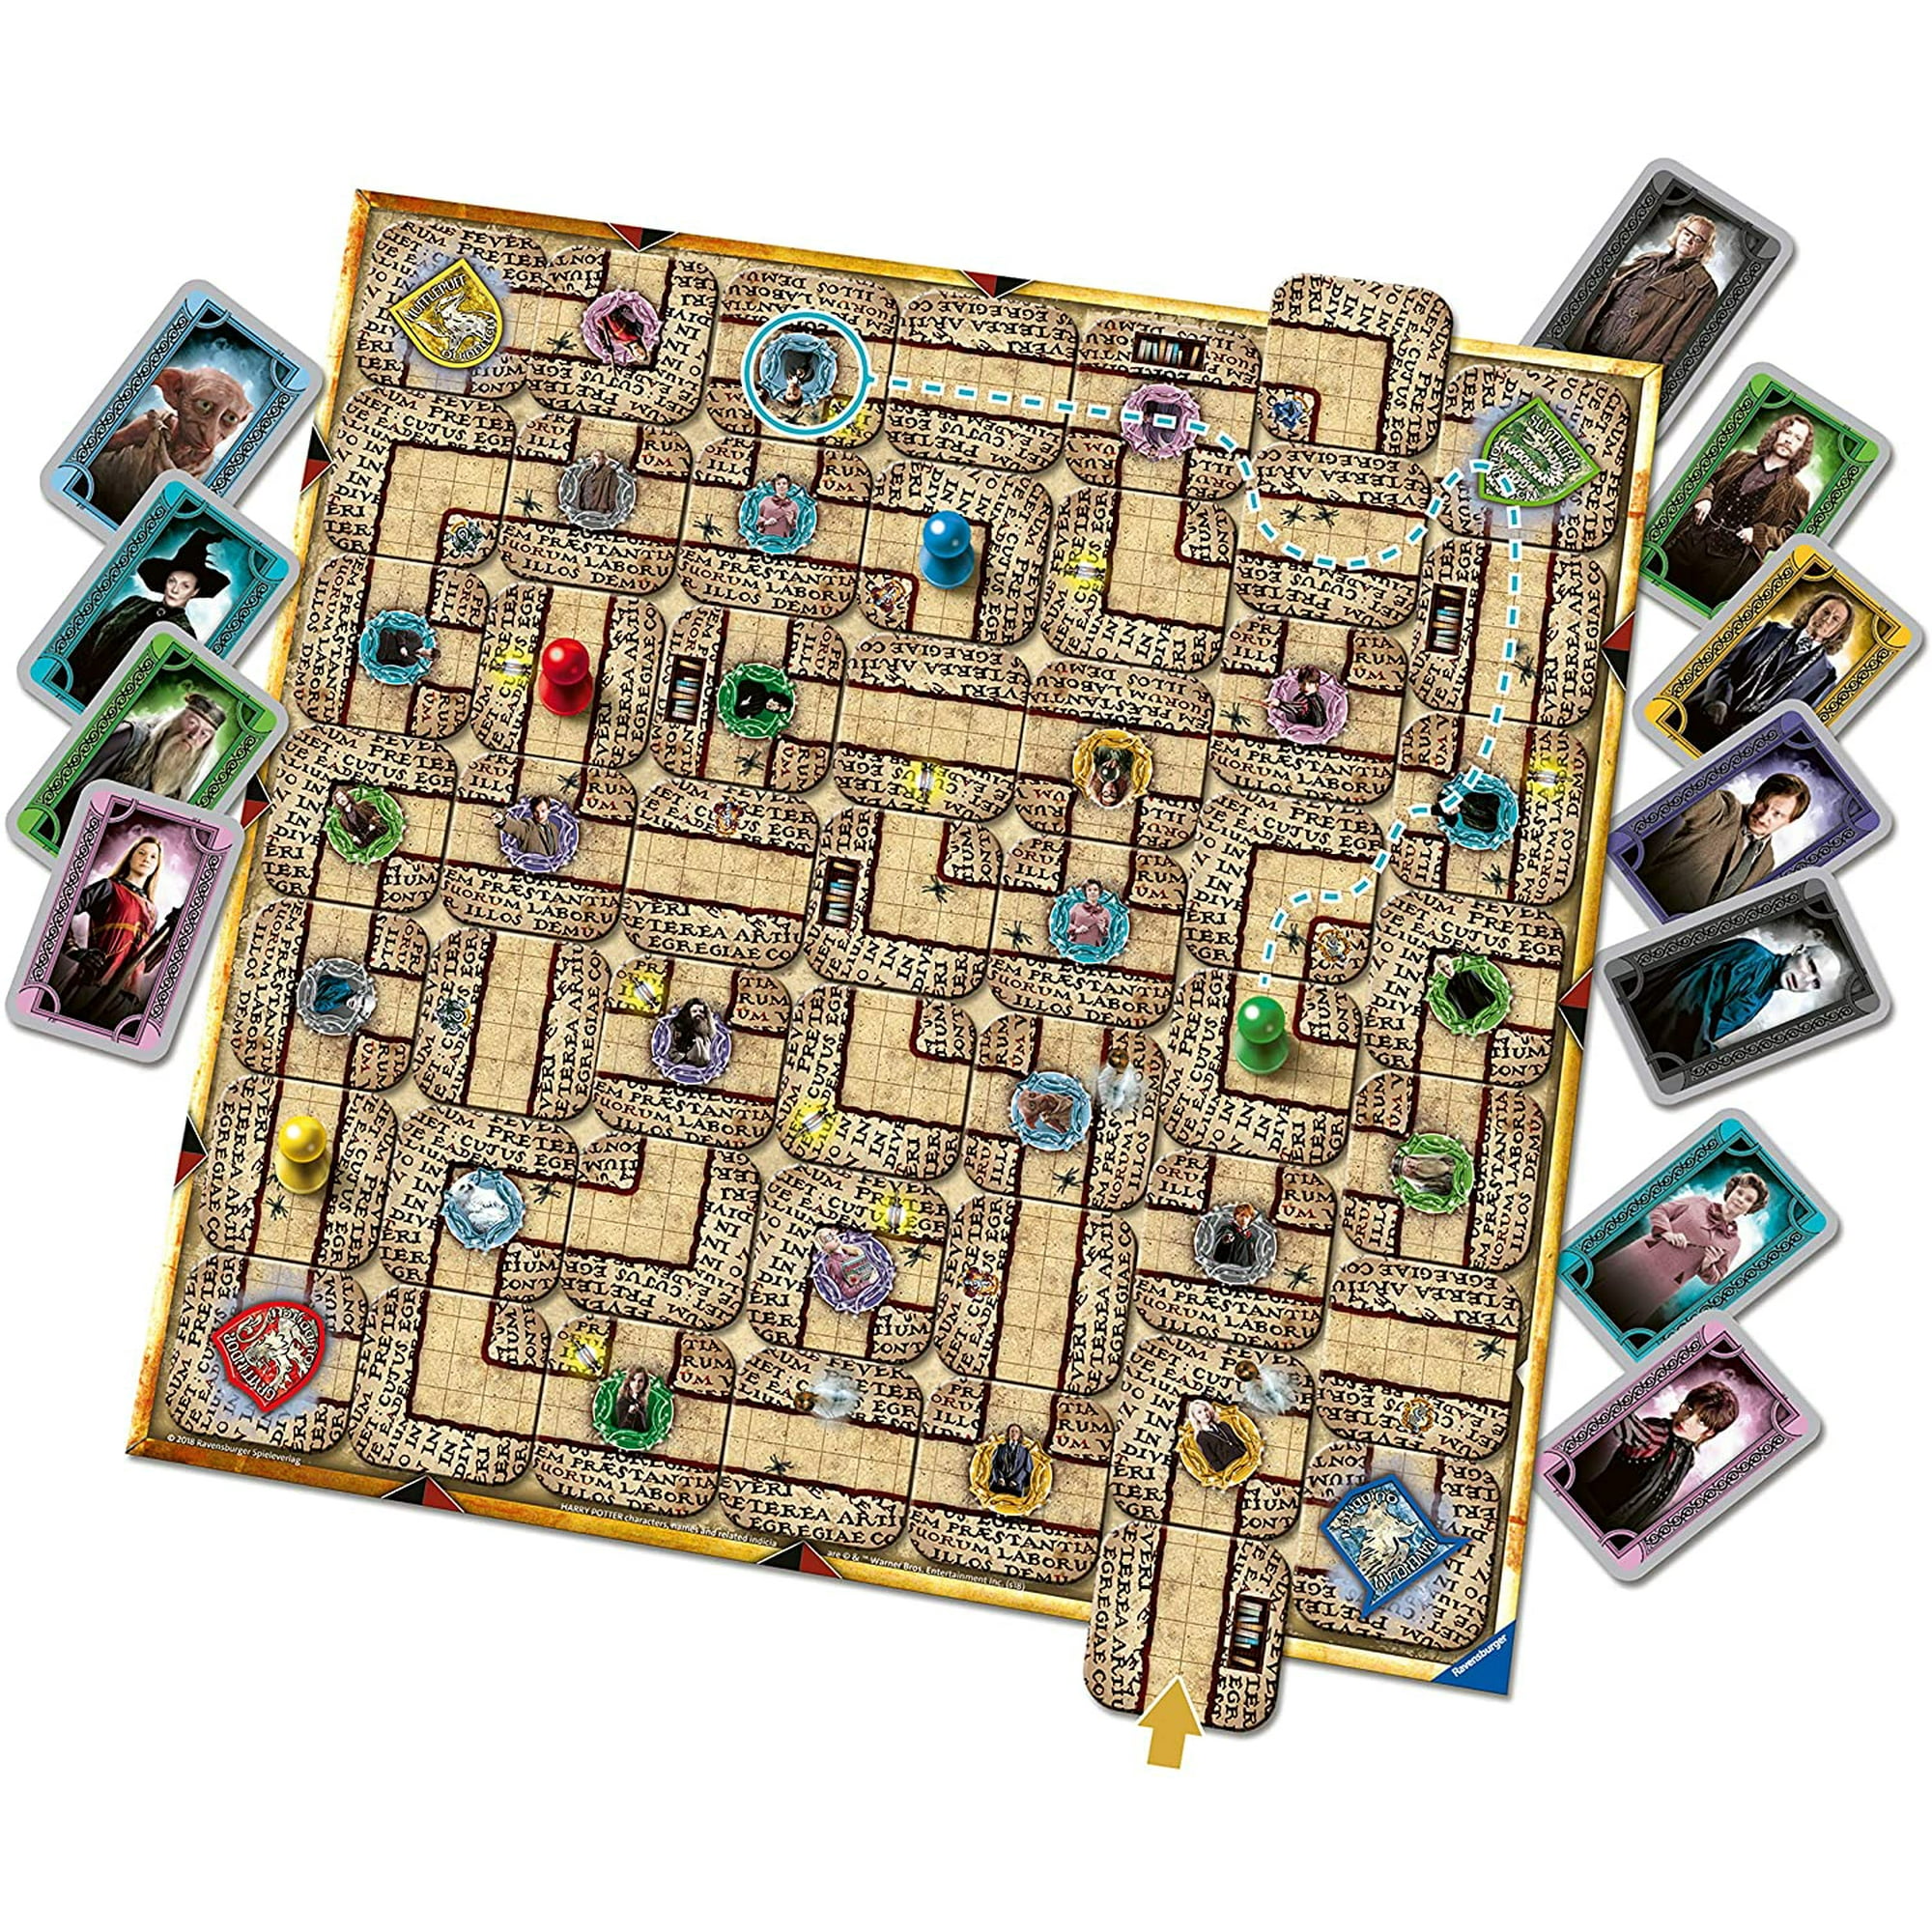 Ravensburger Labyrinth Family Board Game for Kids and Adults Age 7 and Up -  Millions Sold, Easy to Learn and Play with Great Replay Value (26448) 4